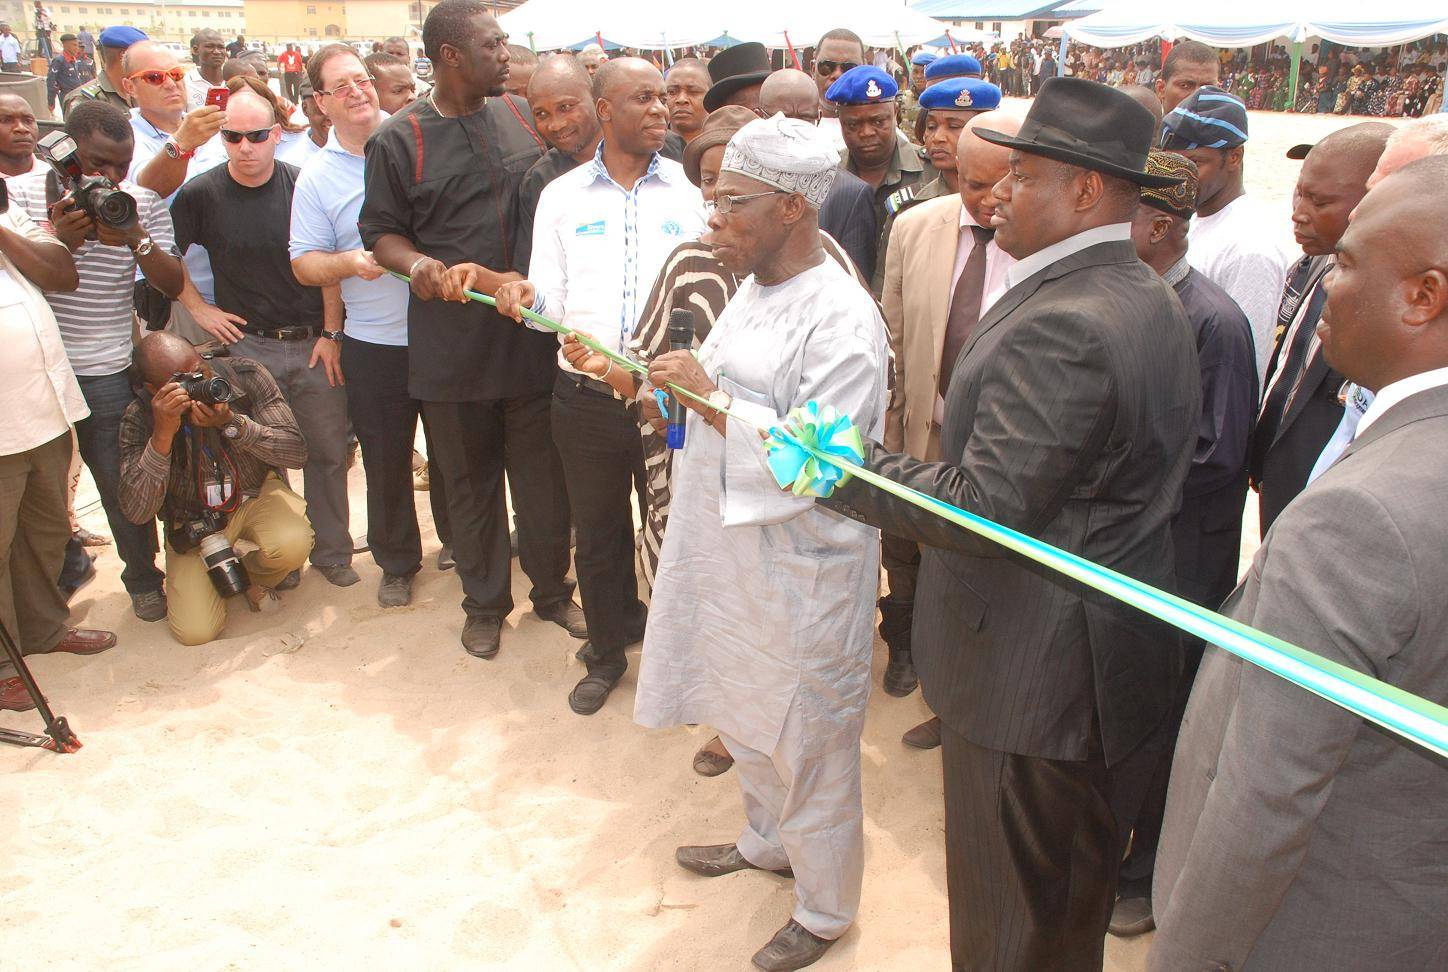 AGRIC 009 FMR PRESIDENT OBASANJO COMMISSIONING THE SONGHAI FARMS WITH GOV AMAECHI AND DEPUTY GOV ENGR IKURU WITH THE WIFE OF D GOV WATCHING